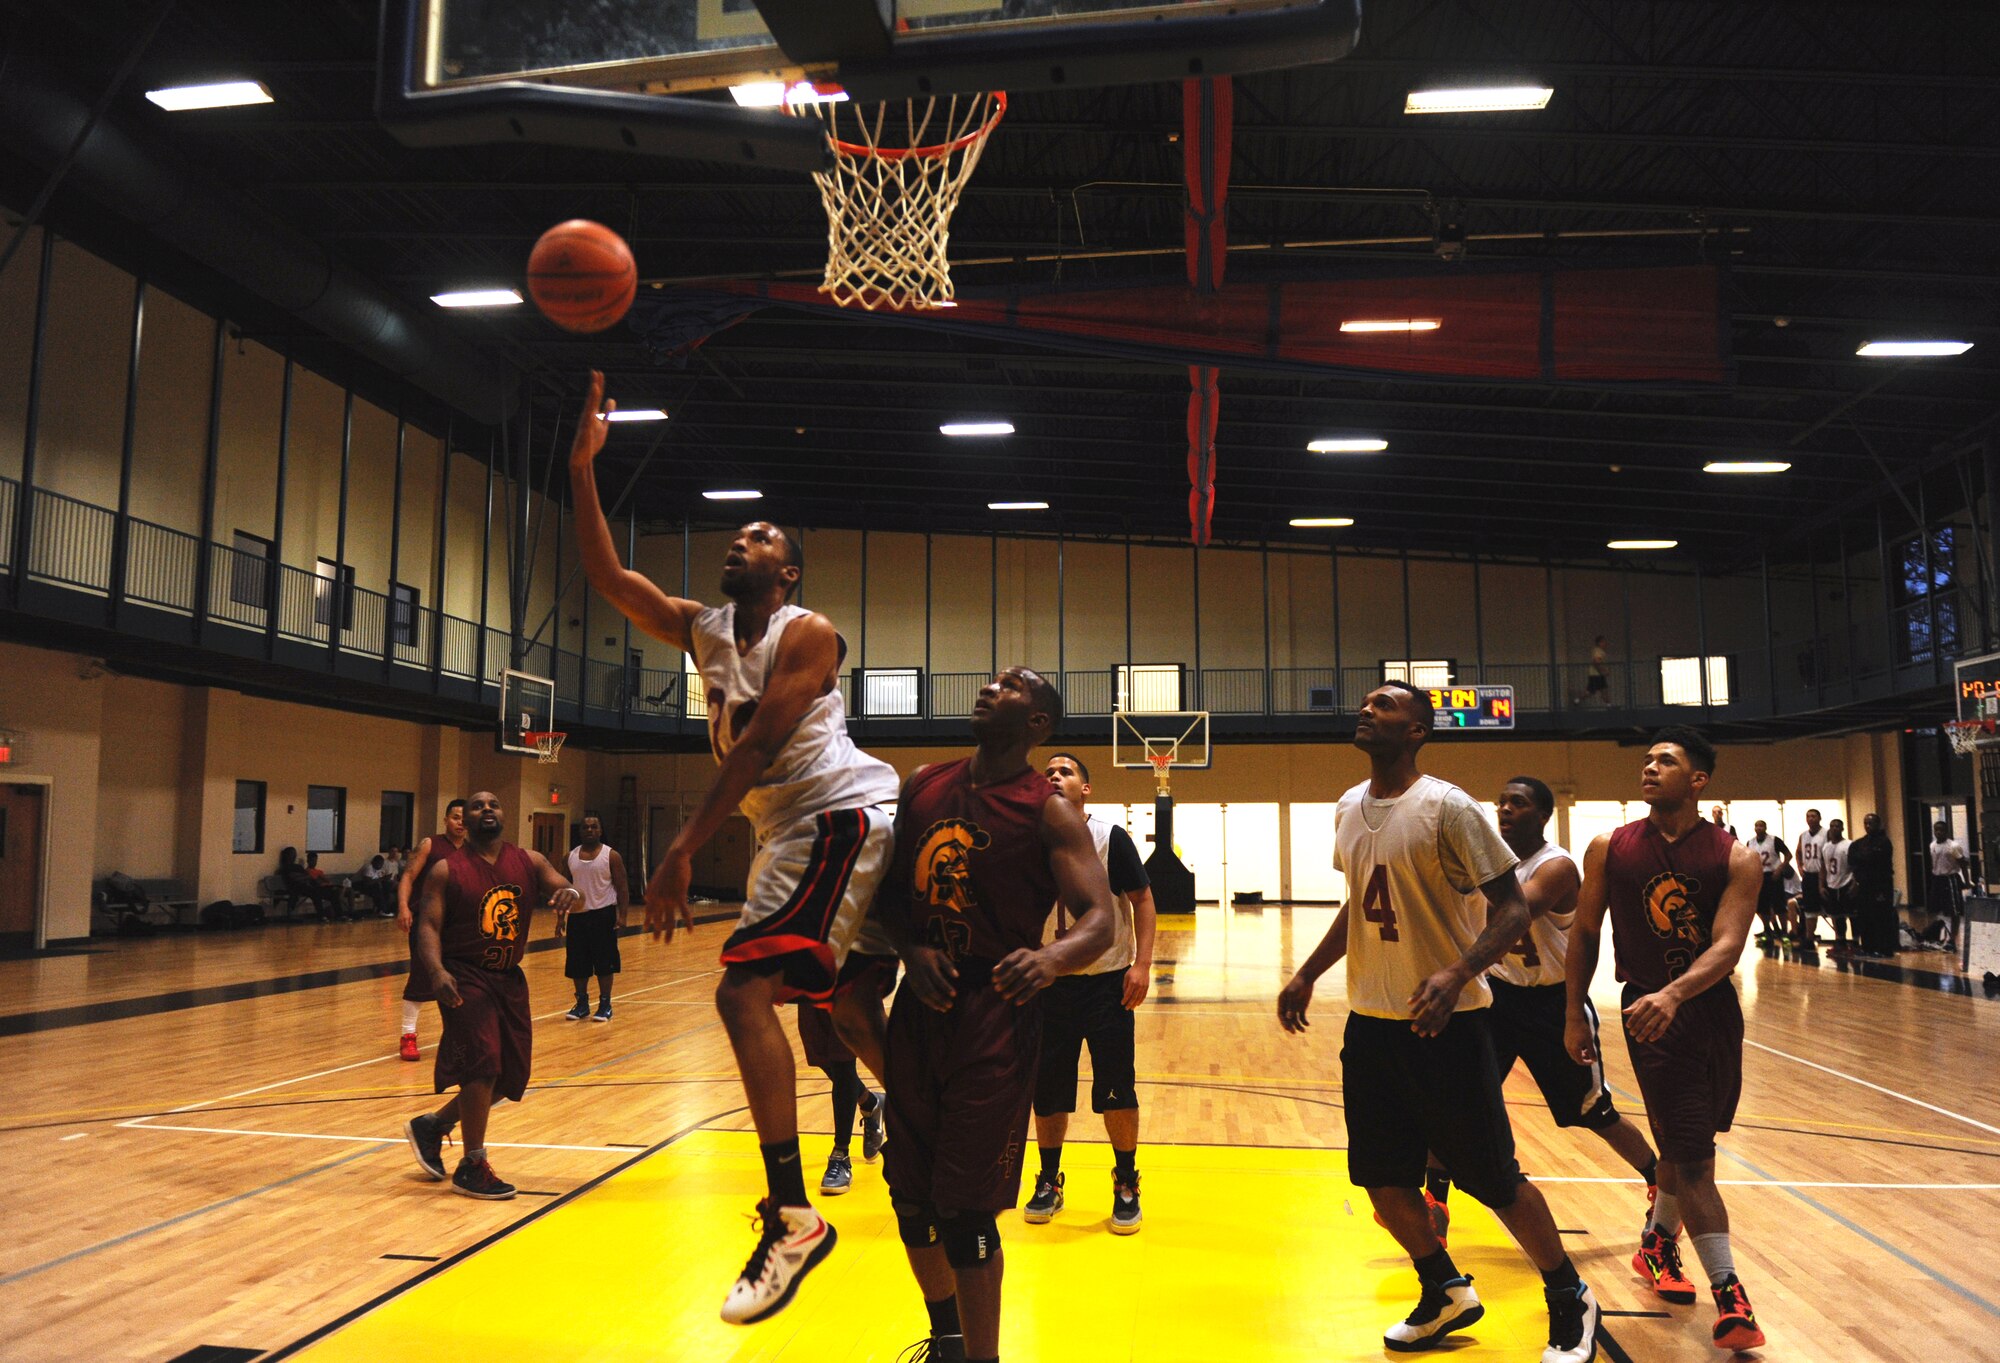 Otis James, a 19th Logistics Readiness Squadron Team 1 player, attempts a layup Jan. 5, 2015, at Little Rock Air Force Base, Ark., during a pre-season intraumural basketball game. The 19th LRS lost to the 19th Medical Group Team 1 by 16 points. (U.S. Air Force photo by Senior Airman Stephanie Serrano)